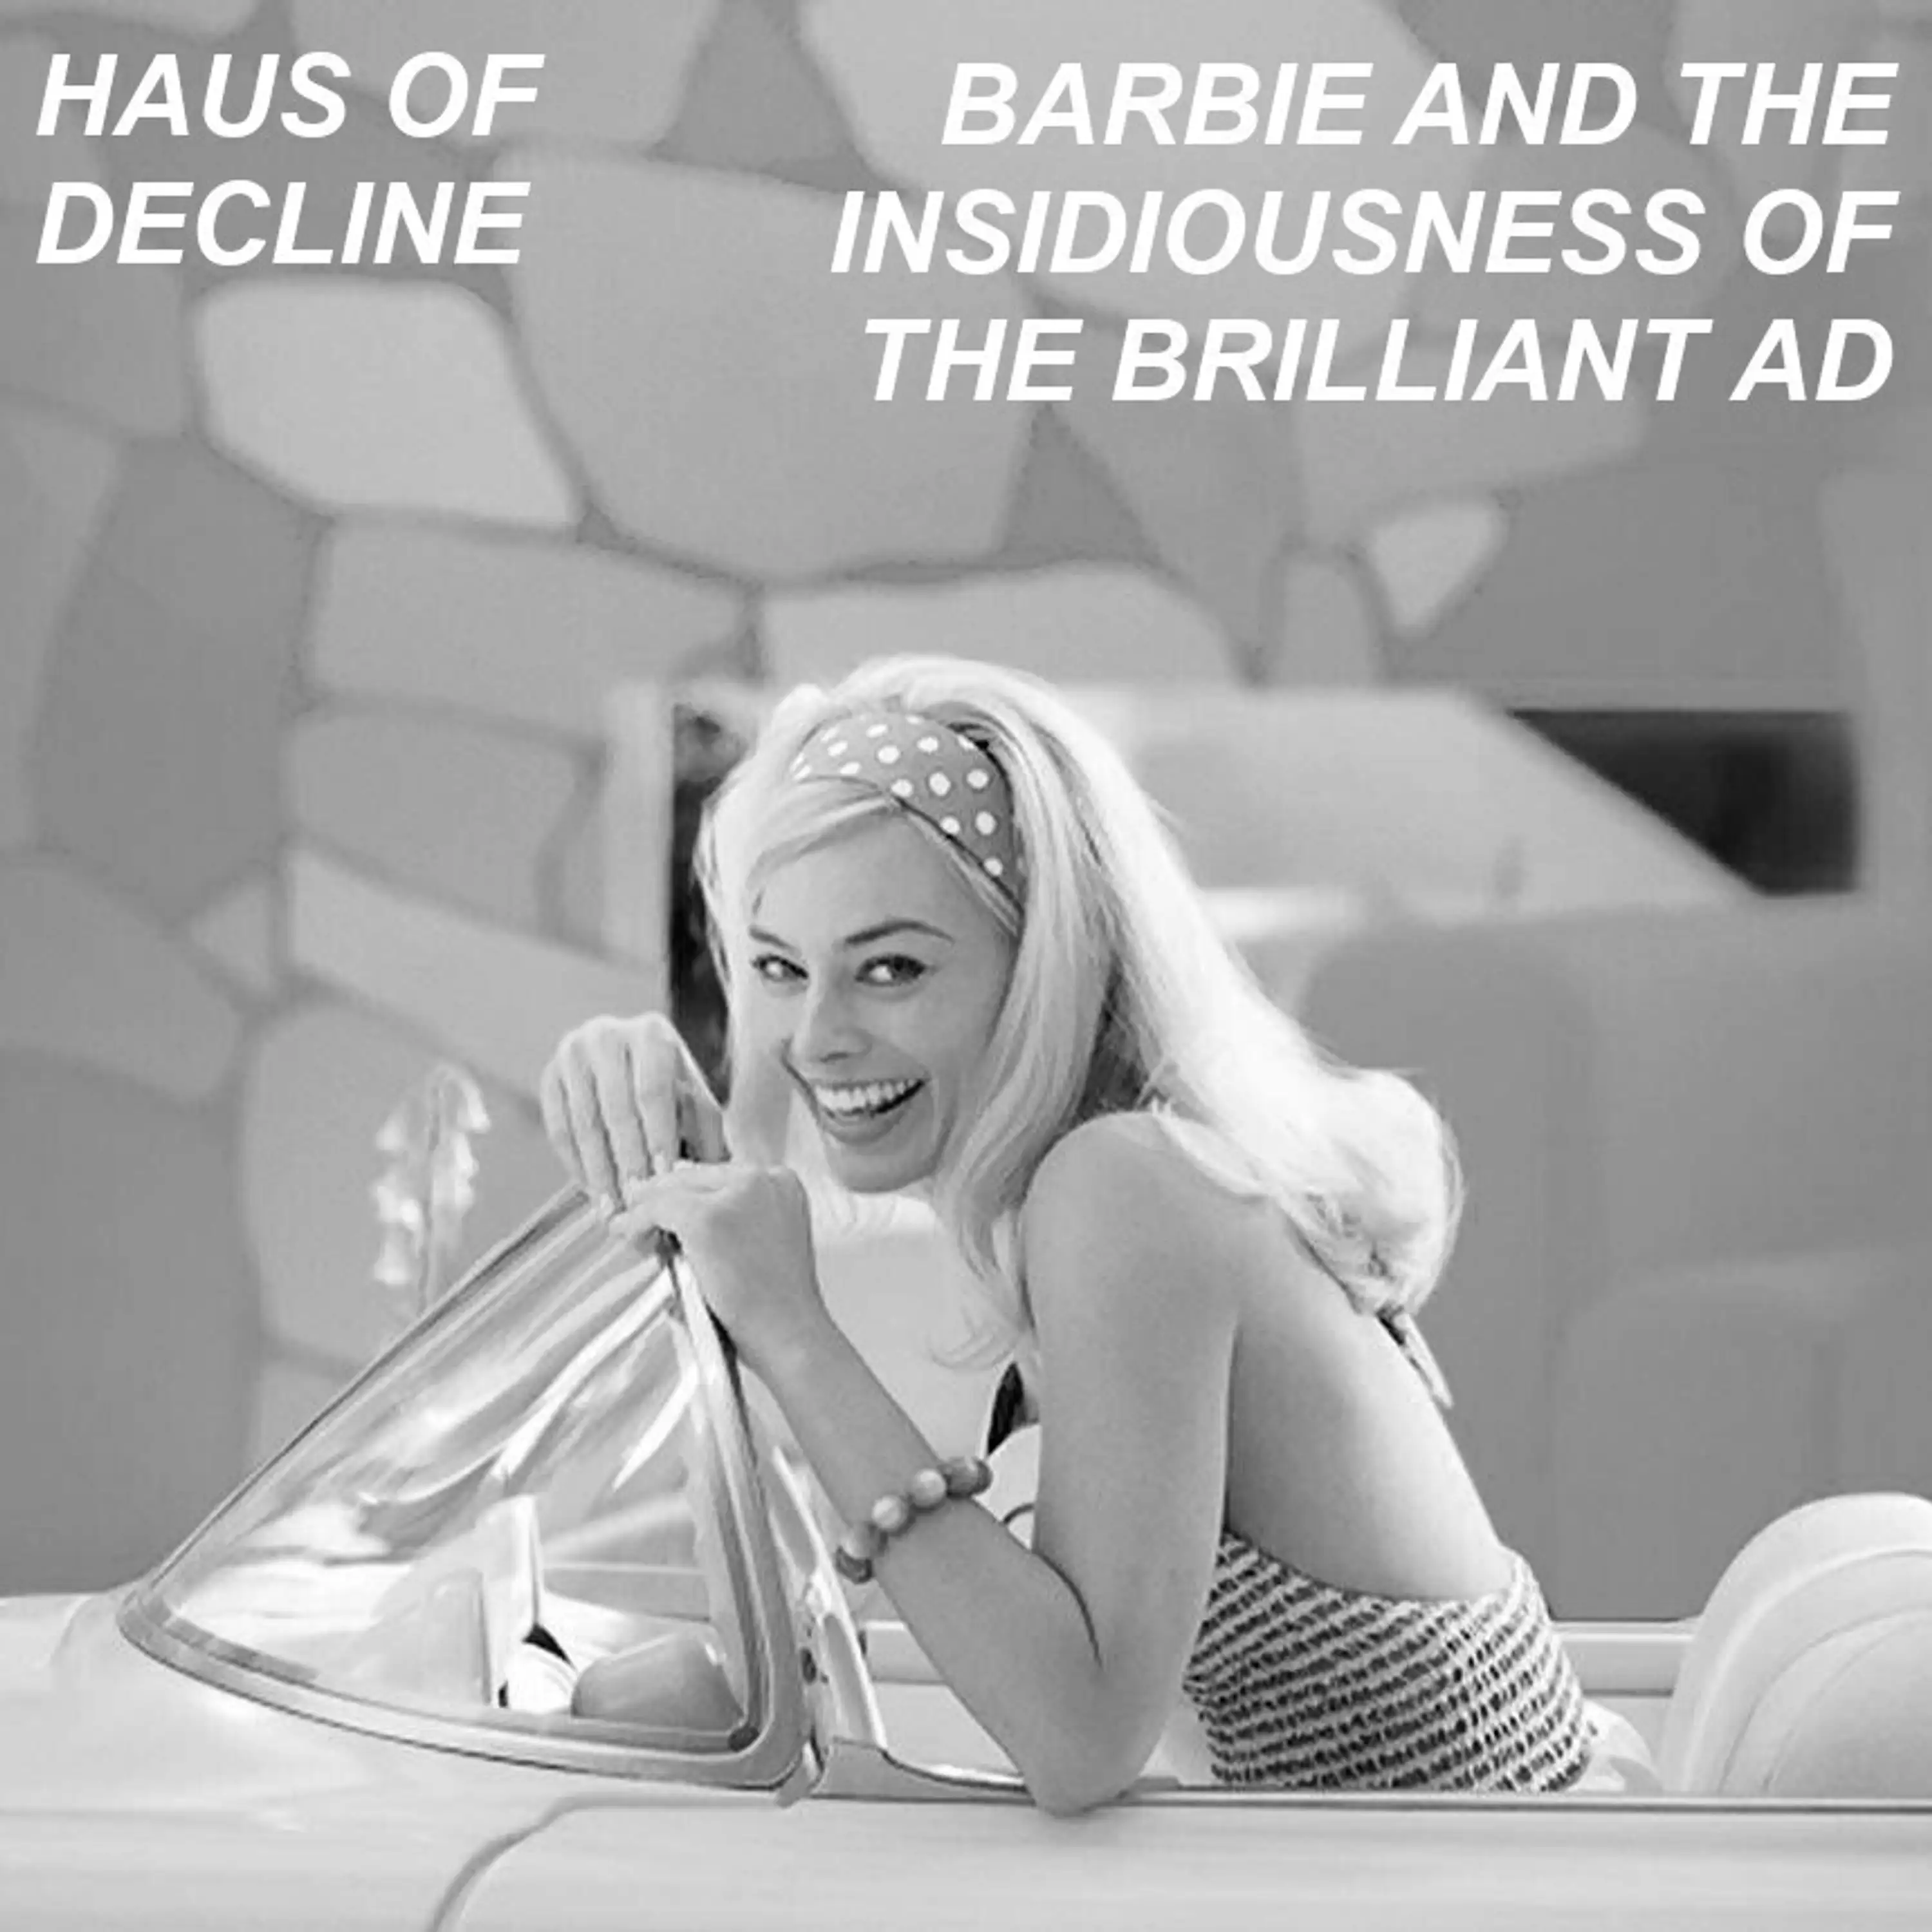 Barbie and the Insidiousness of the Brilliant Ad